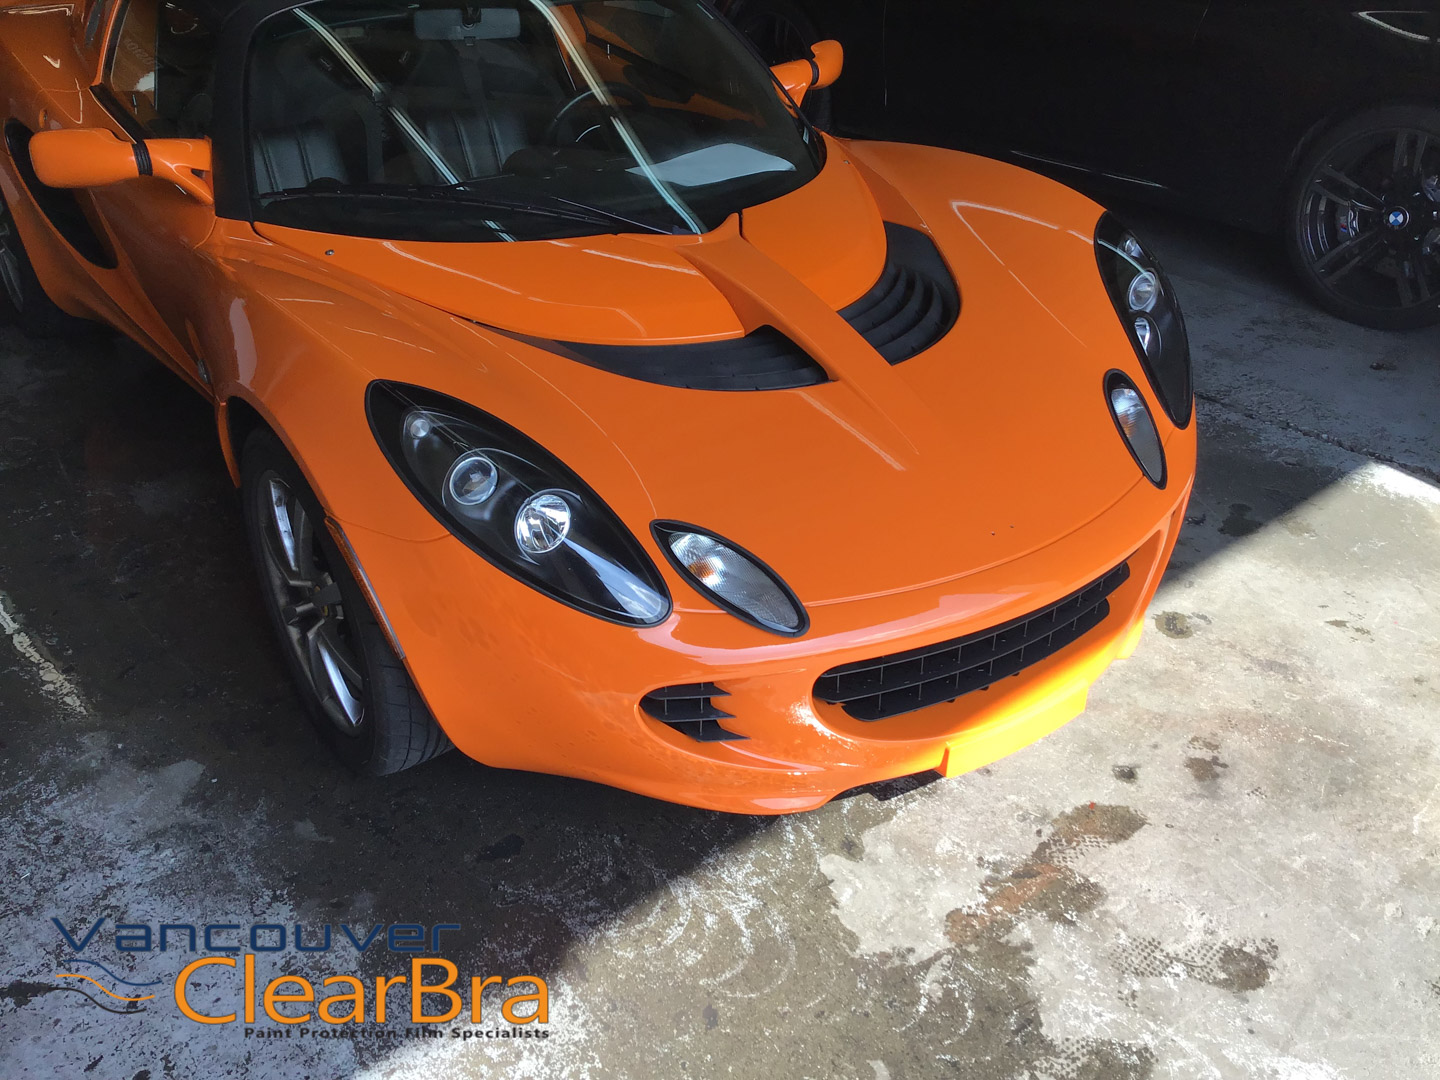 3M Scotchgard Paint Protection Film Pro - Vancouver ClearBra